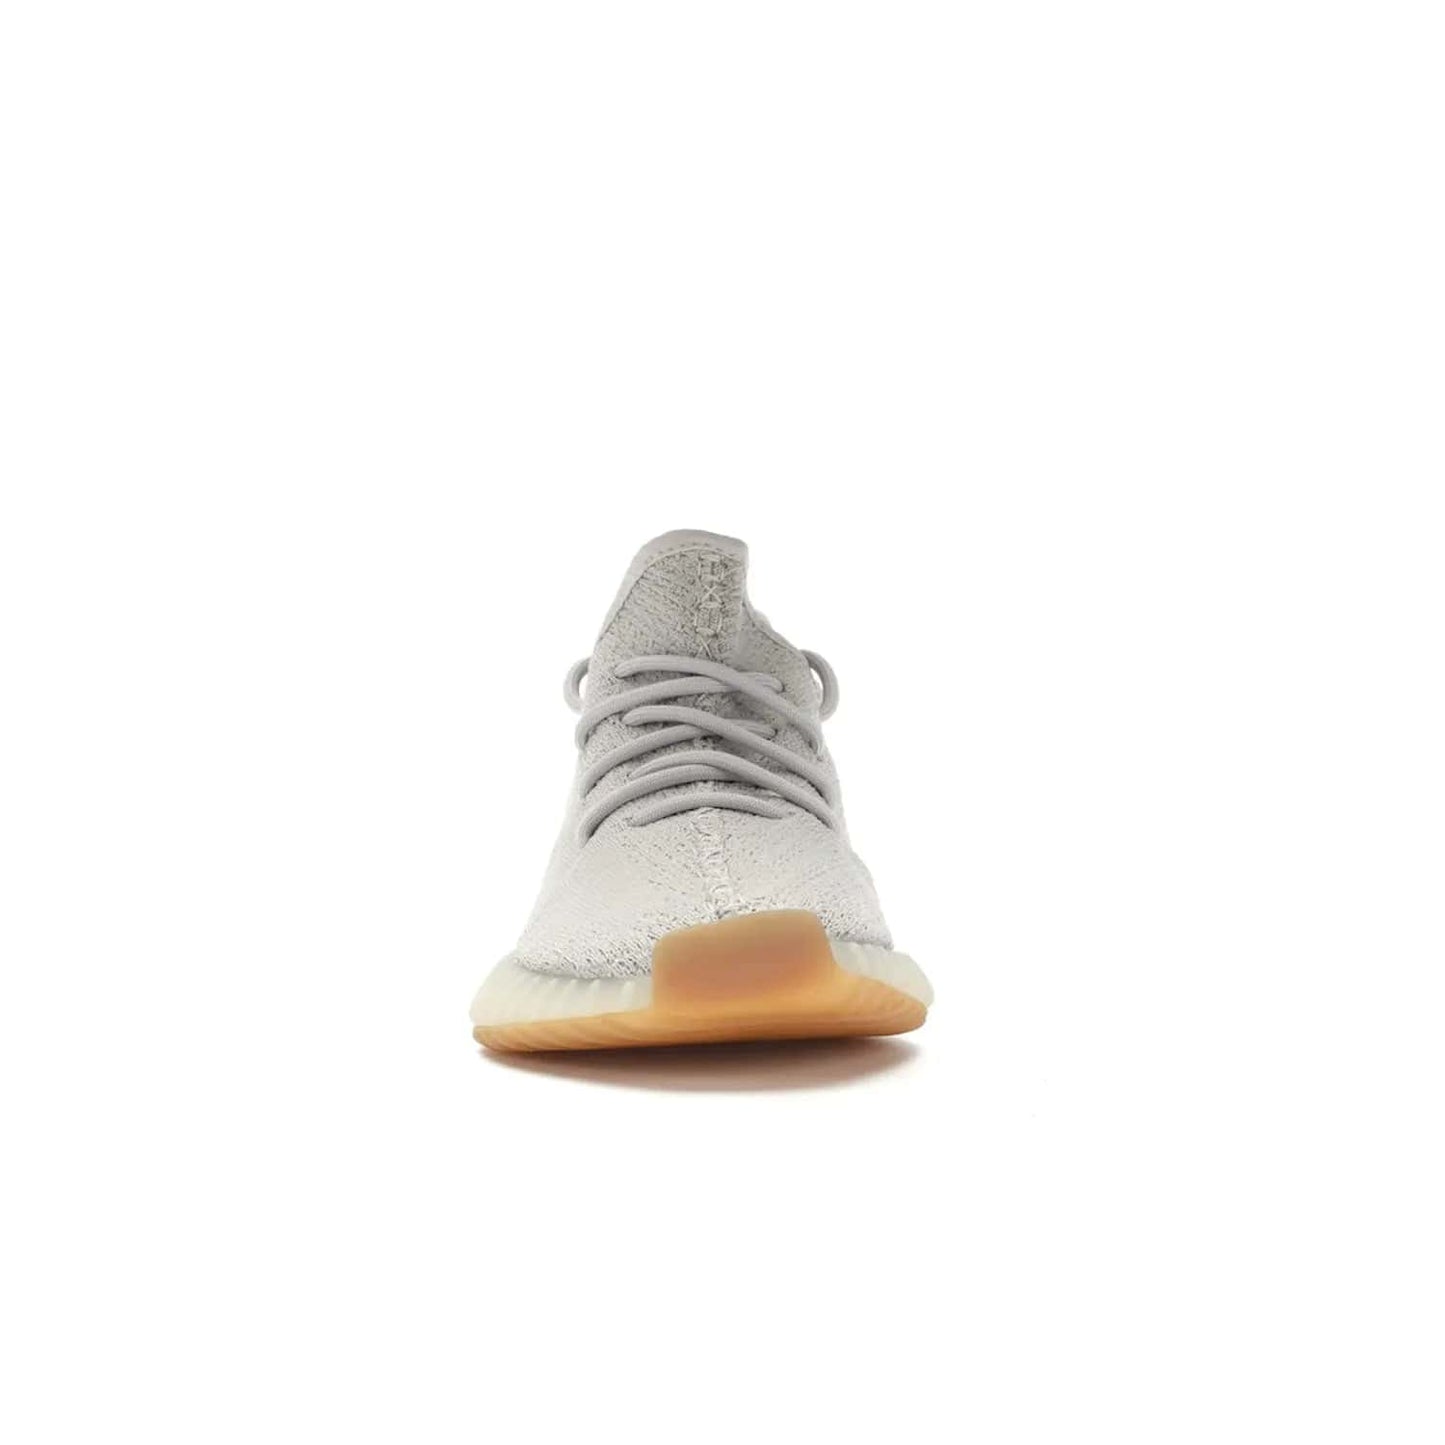 adidas Yeezy Boost 350 V2 Sesame - Image 10 - Only at www.BallersClubKickz.com - Introducing the adidas Yeezy Boost 350 V2 Sesame. Featuring a sesame upper, midsole and gum sole for a sleek silhouette. Cop the stylish sneaker released in November 2018.